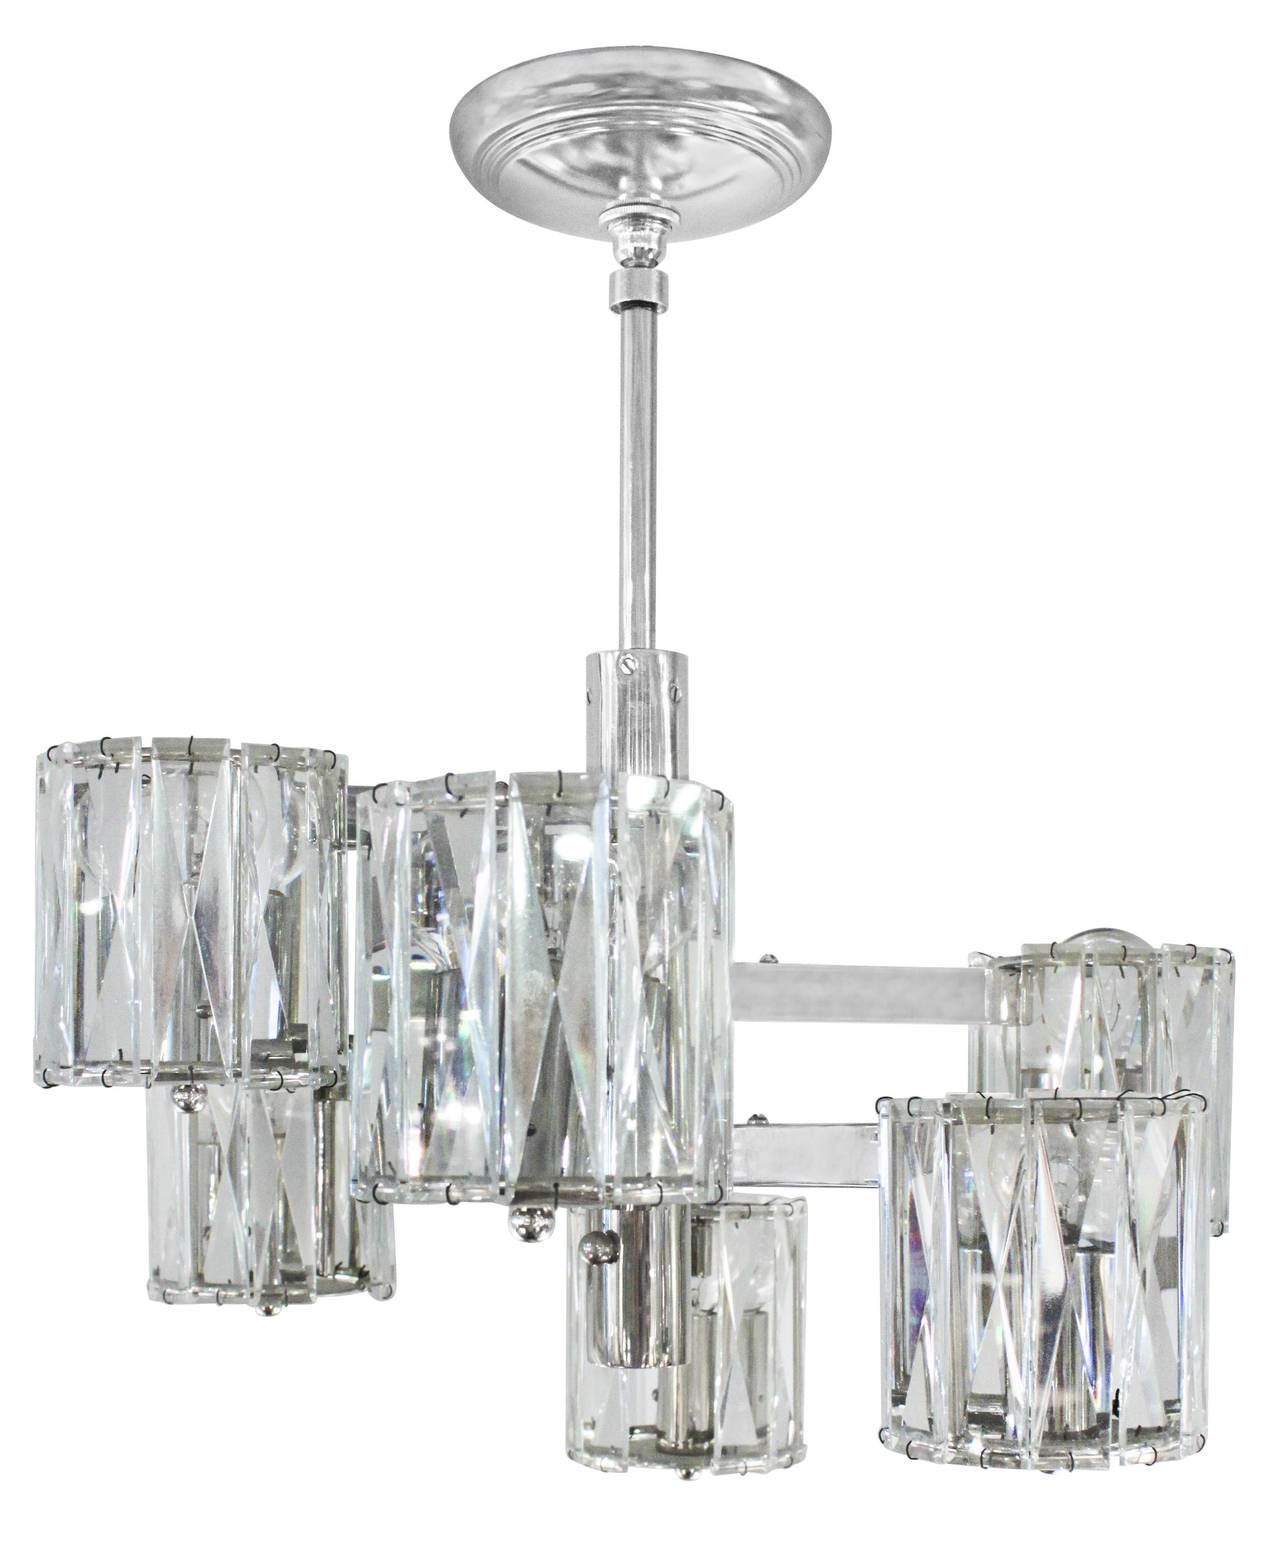 Chic chandelier in polished chrome, six arms with cut crystals, by Lobmeyr, Austria, 1950's (stamped in metal). Lobmeyr was the company that supplied the extraordinary lighting at The Metropolitan Opera House in NYC.

19 inches to top of canopy.